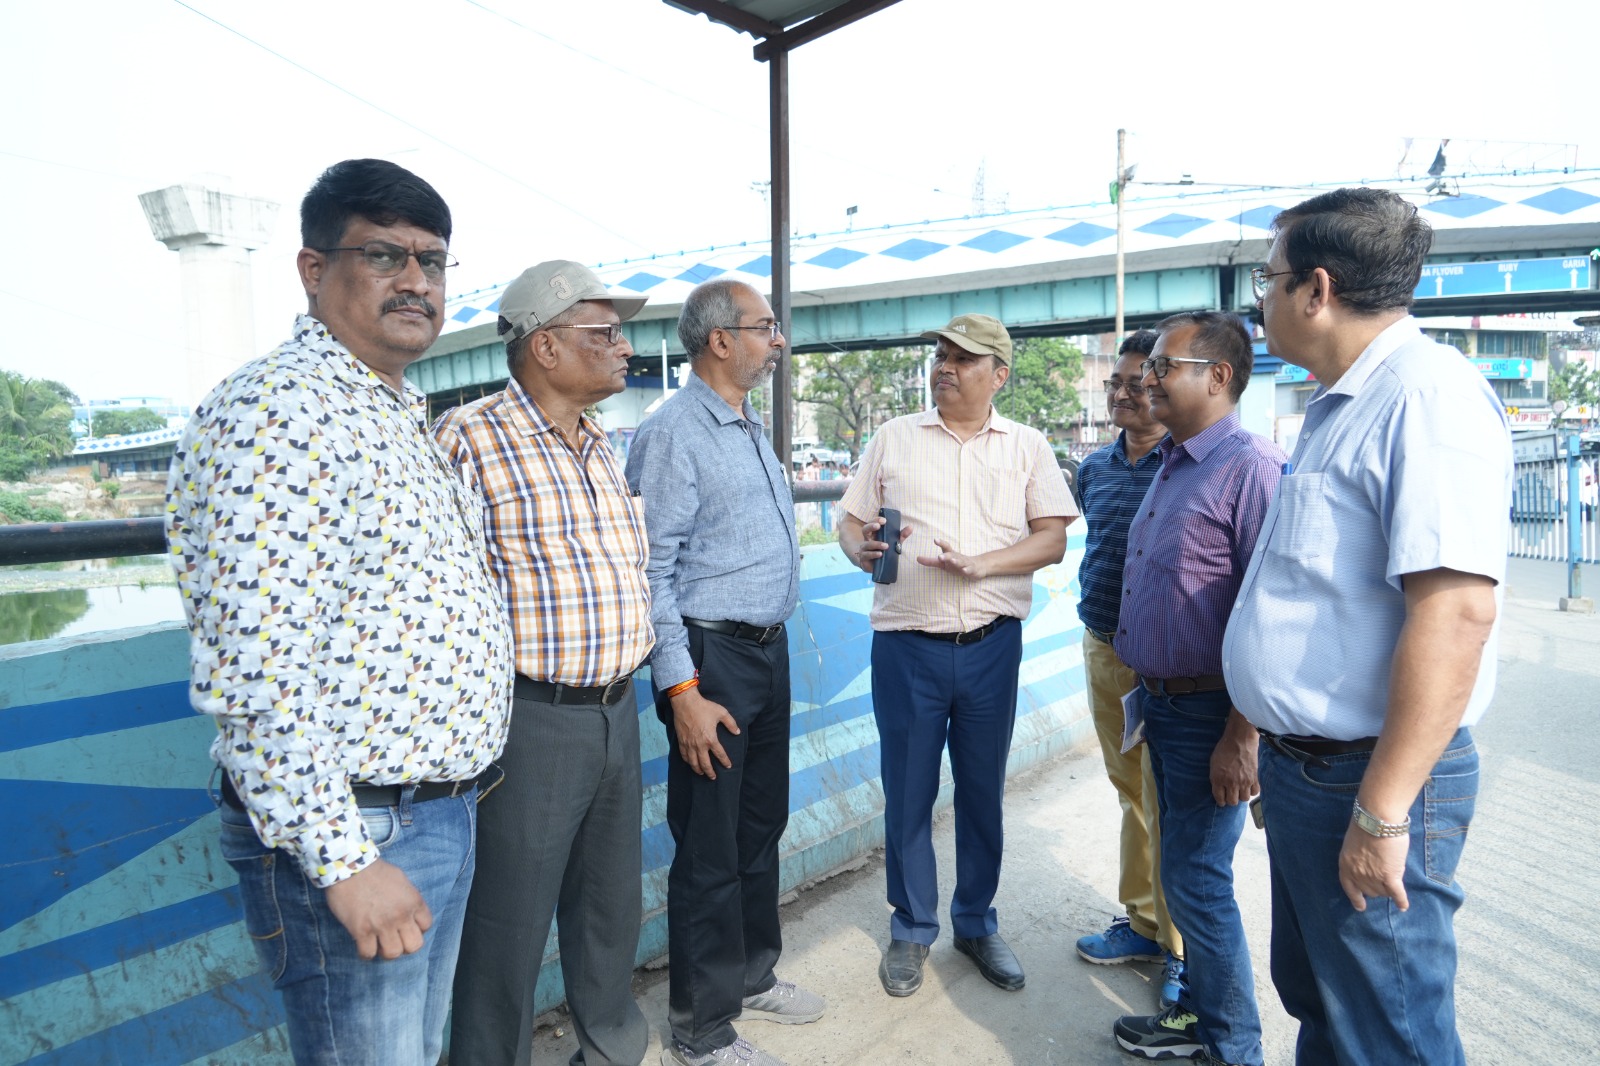 Shri P Uday Kumar Reddy, GM, Metro Railway inspecting Chingrighata Crossing on 13.05.2023 with senior officials of Metro Railway and RVNL.